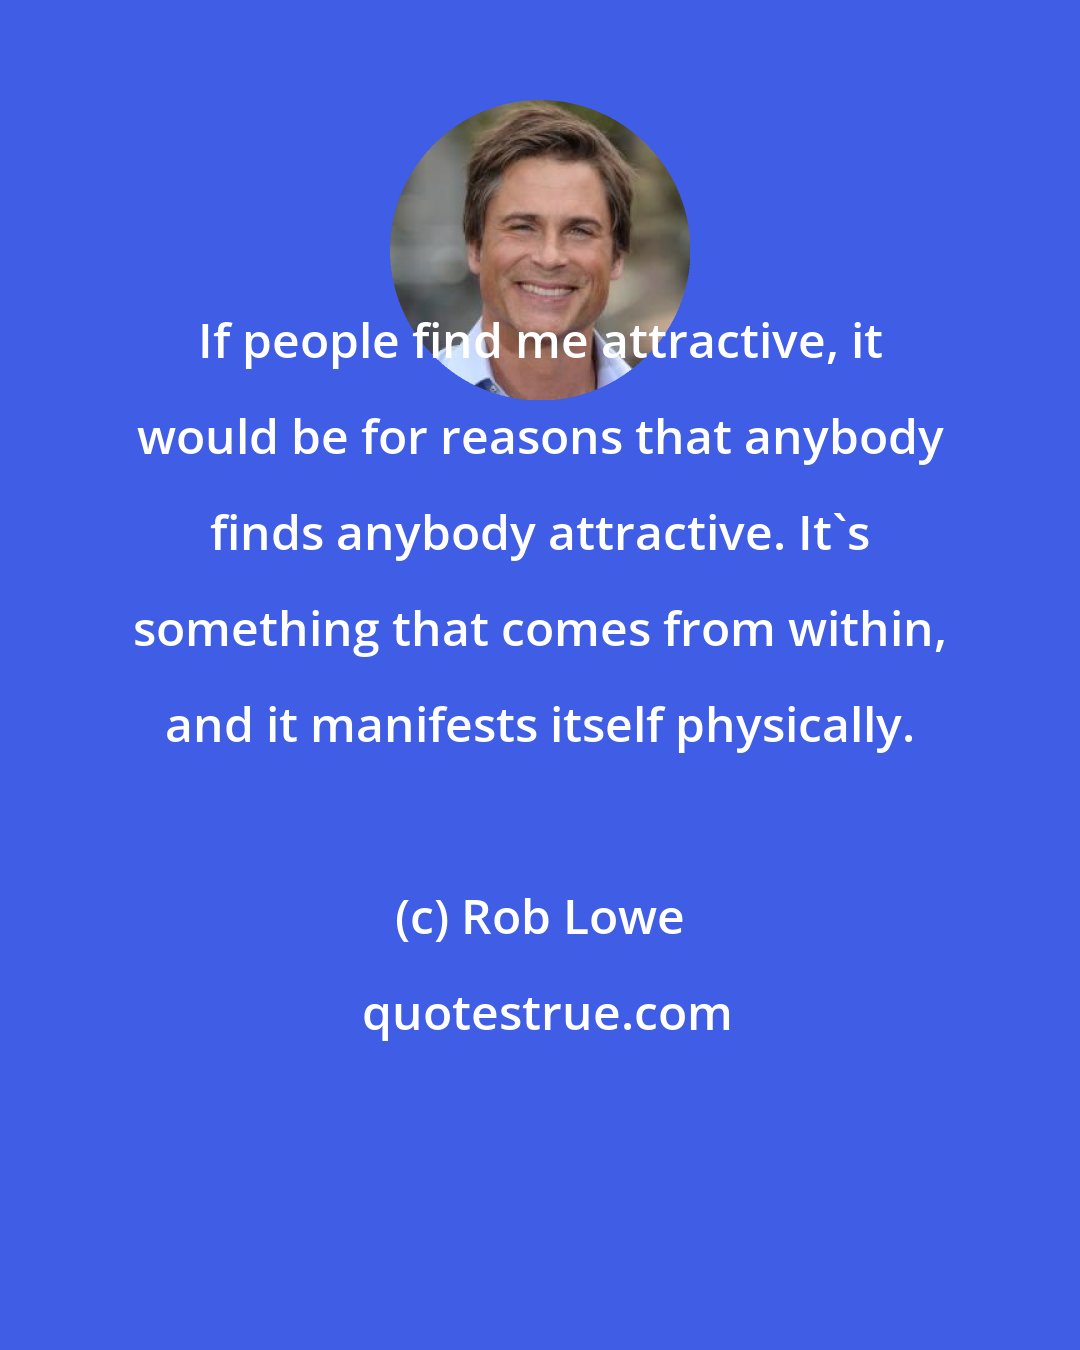 Rob Lowe: If people find me attractive, it would be for reasons that anybody finds anybody attractive. It's something that comes from within, and it manifests itself physically.